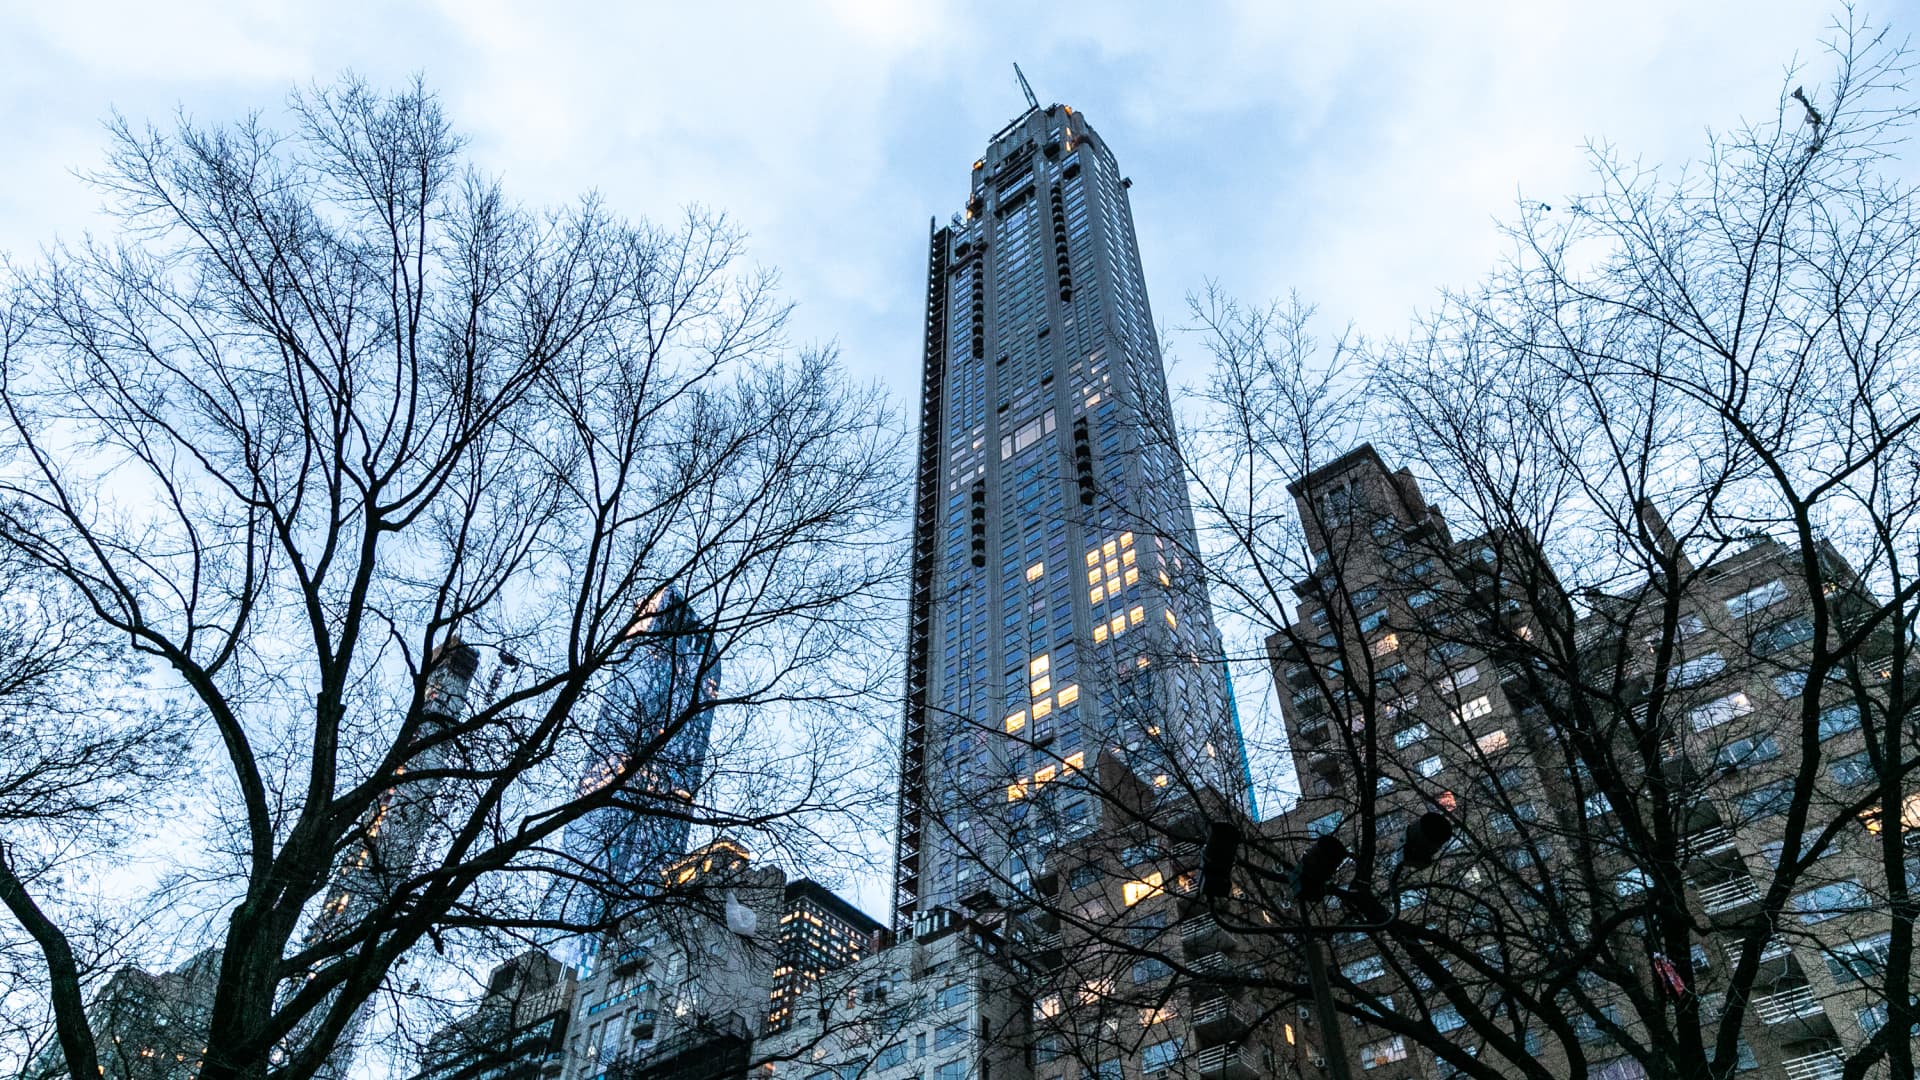 The 220 Central Park South building, center, stands in New York, on Jan. 23, 2019. Just days after buying one of the most expensive residential properties in London, Citadel founder Ken Griffin set a U.S. record with the $238 million penthouse at 220 Central Park South.